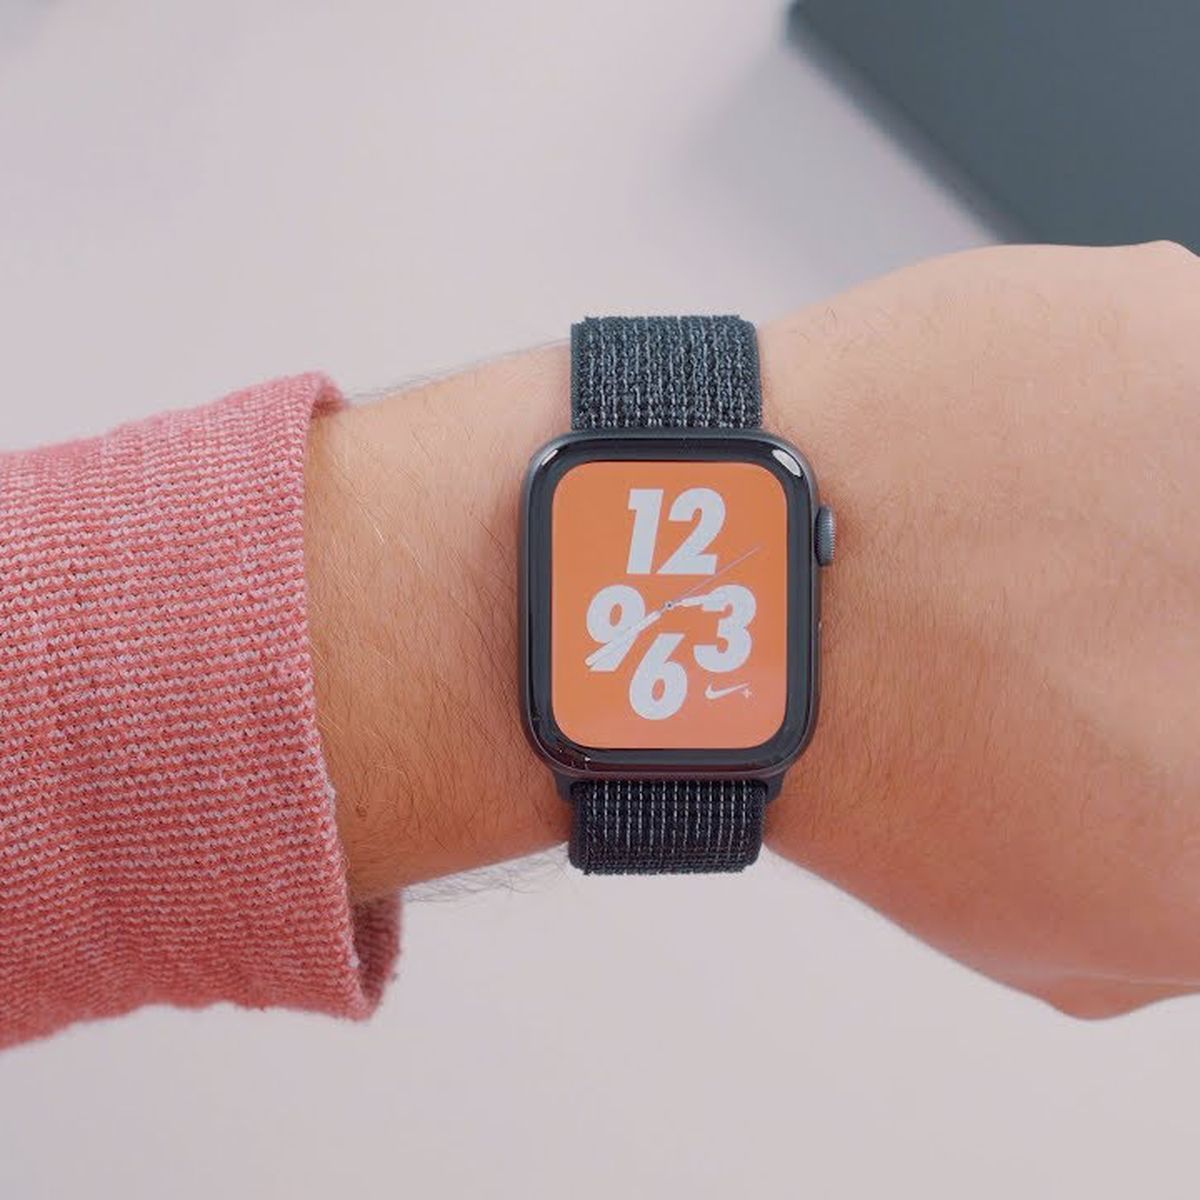 interfaz marca mostaza Hands-On With the New Nike+ Apple Watch Series 4 - MacRumors